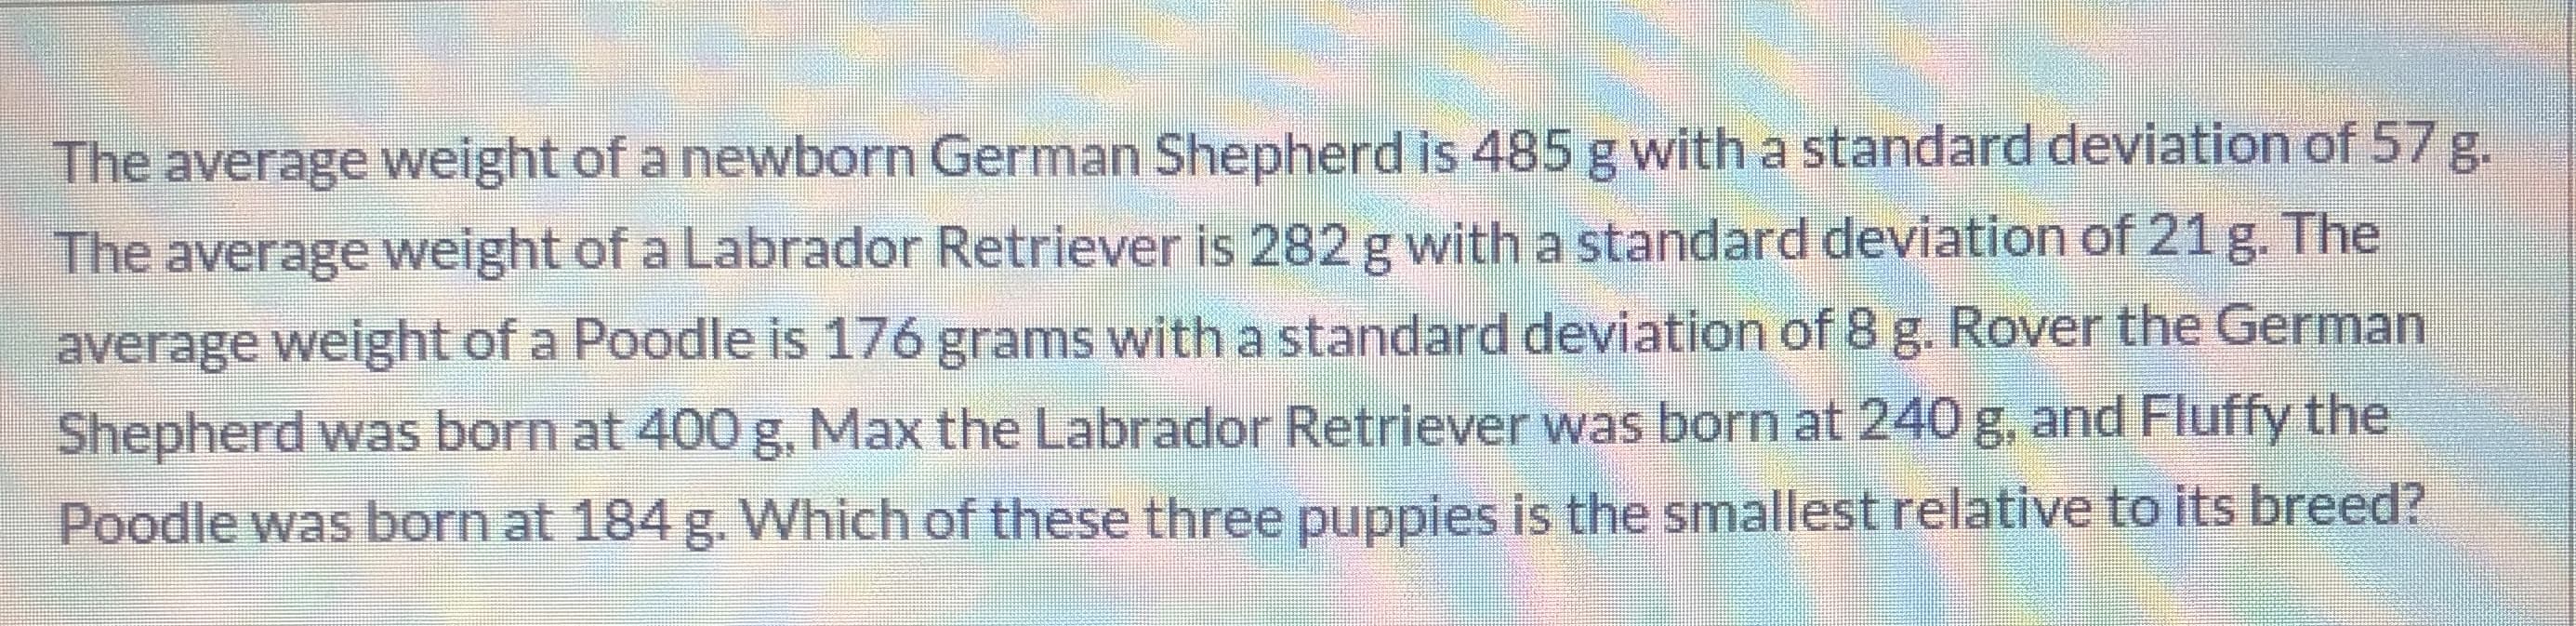 The average weight of a newborn German Shepherd is 485 g with a standard deviation of 57g
The average weight of a Labrador Retriever is 282 g with a standard deviation of 21 g. The
average weight of a Poodle is 176 grams with a standard deviation of 8 g. Rover the German
Shepherd was born at 400 g, Max the Labrador Retriever was born at 240 g, and Fluffy the
Poodle was born at 184 g. Which of these three puppies is the smallest relative to its breed?
